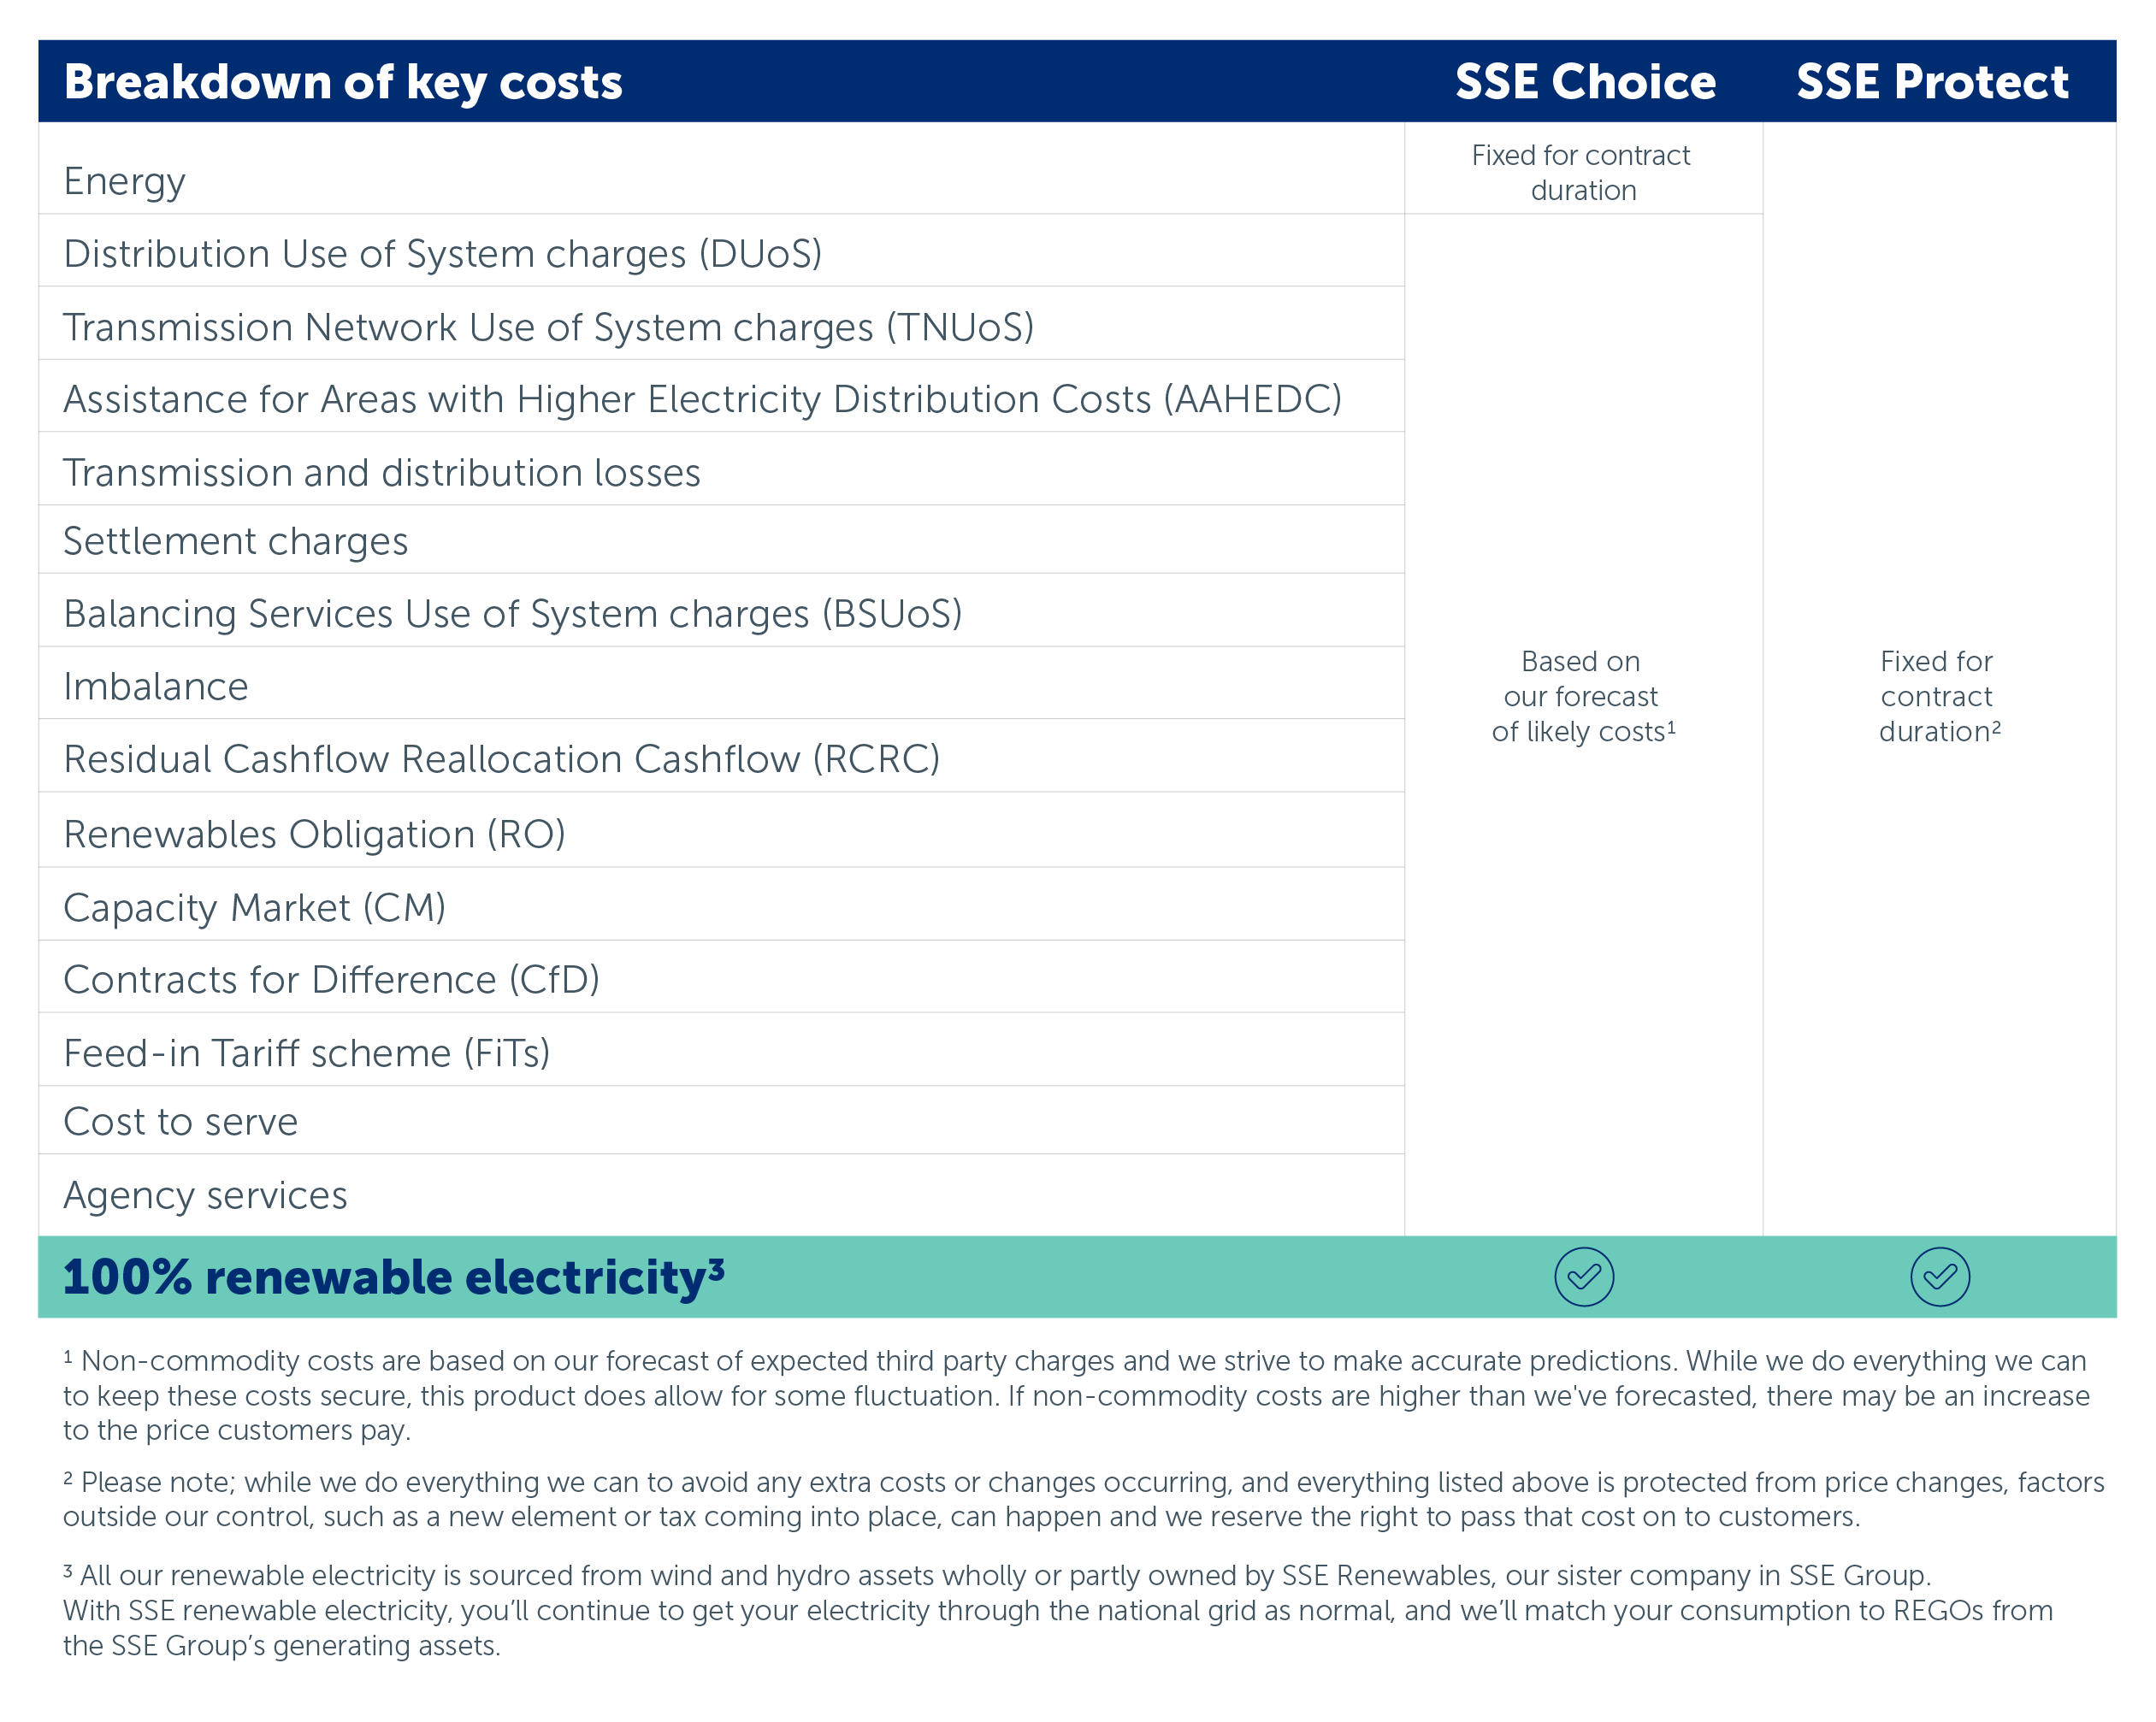 Breakdown of key costs for electricity 